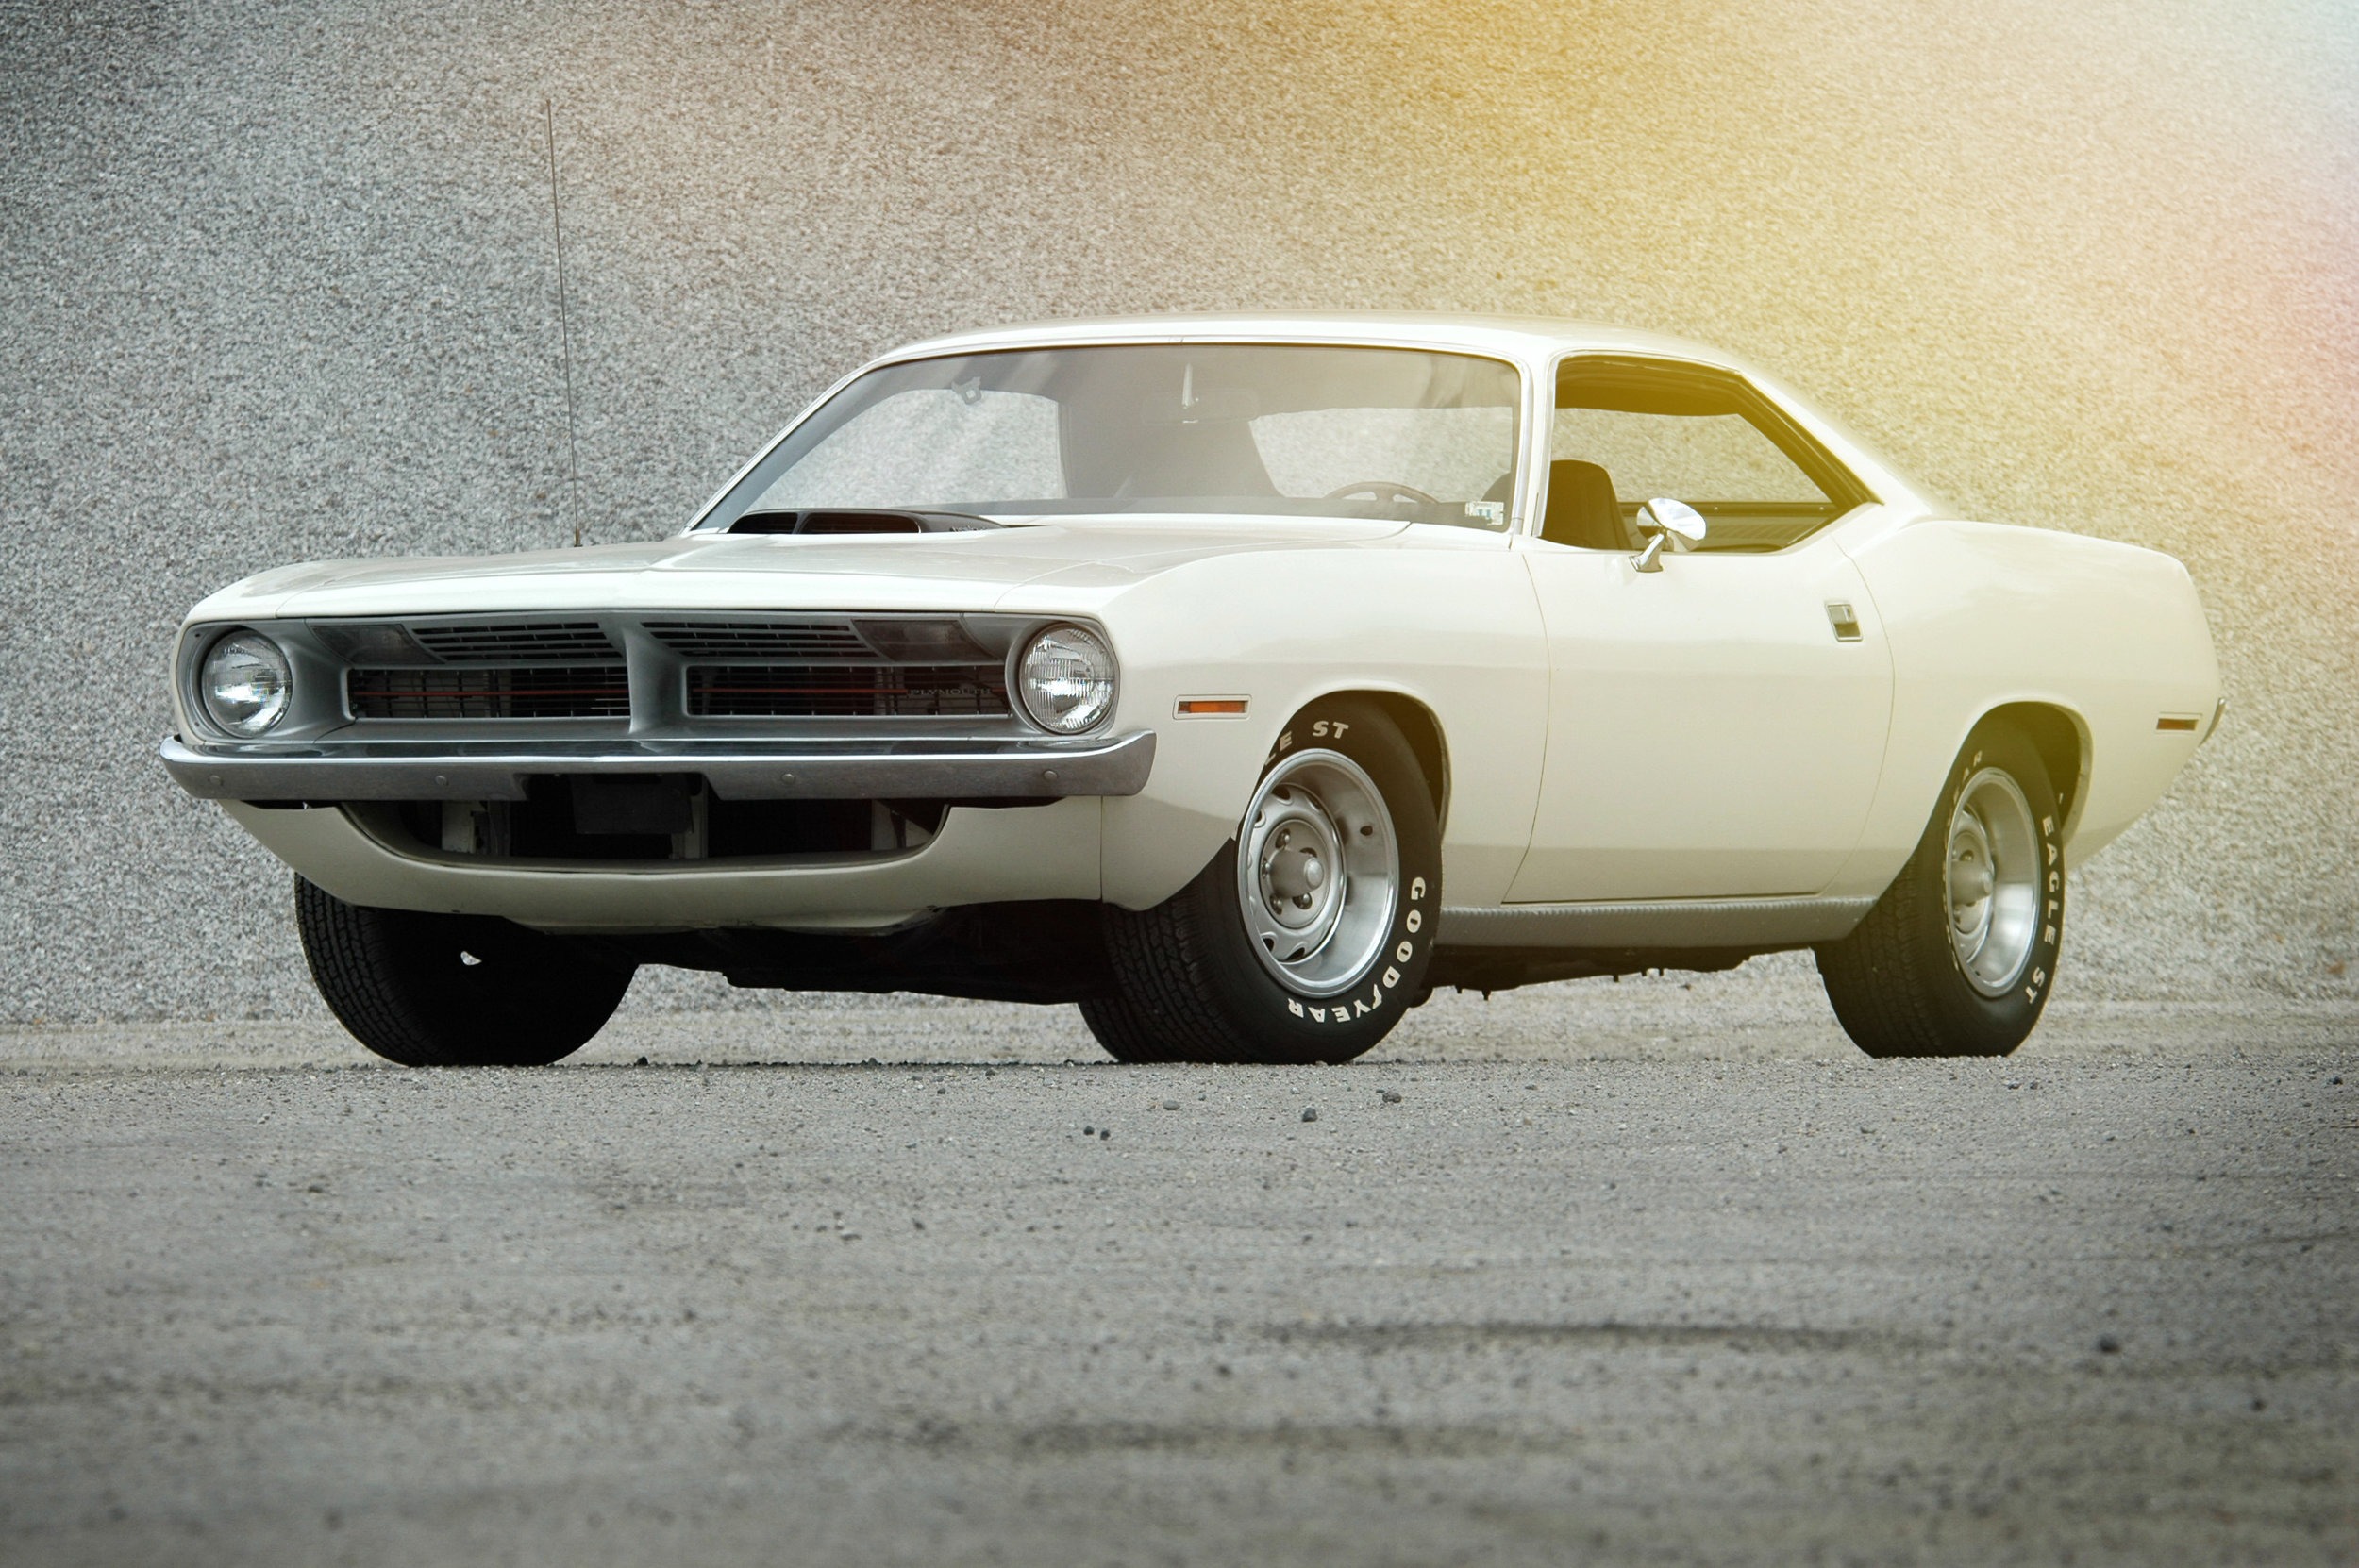 Bought for $500, the Very First 1970 Plymouth Hemi Cuda Is for Sale for $2.2M